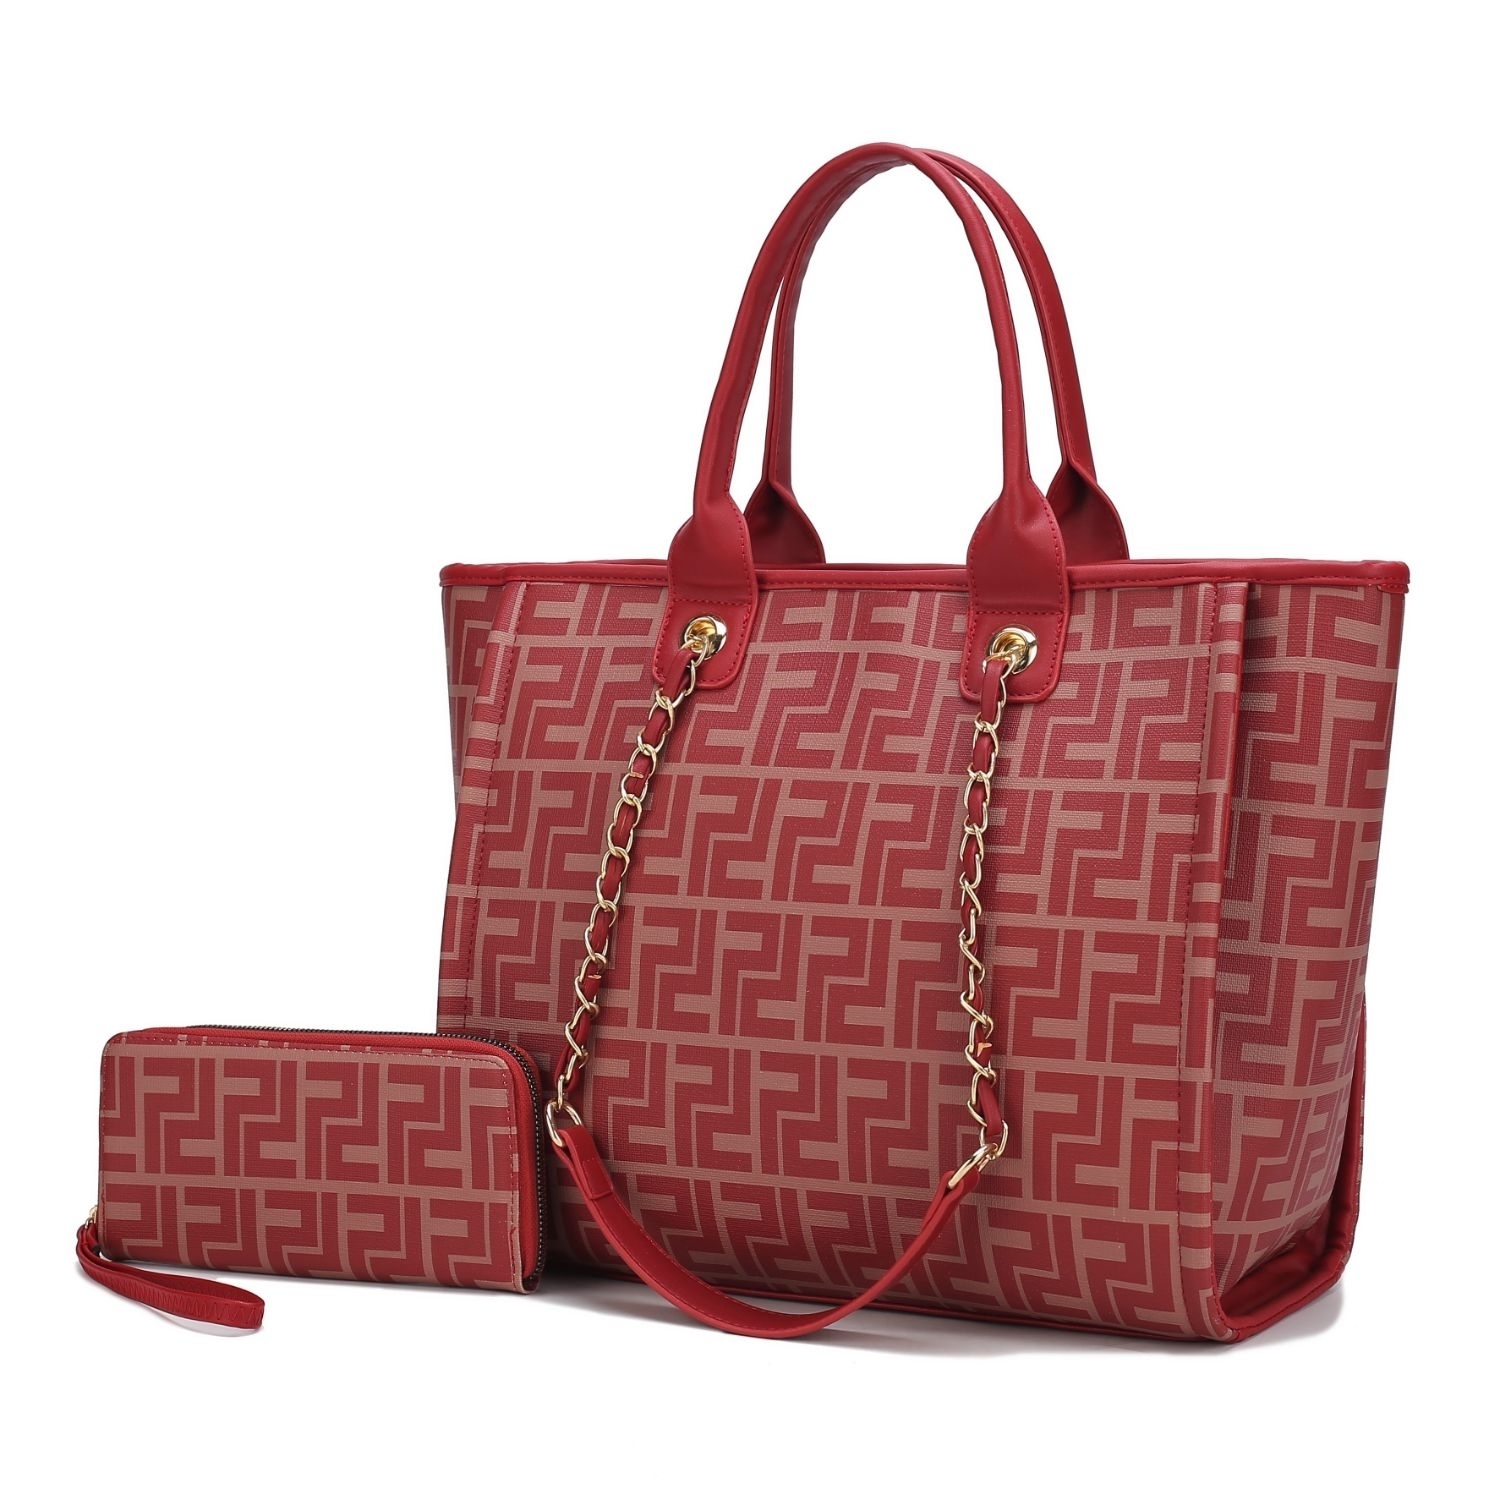 MKF Collection Marlene Vegan Leather Women's Tote Bag By Mia K With Wallet- 2 Pieces - Burgundy